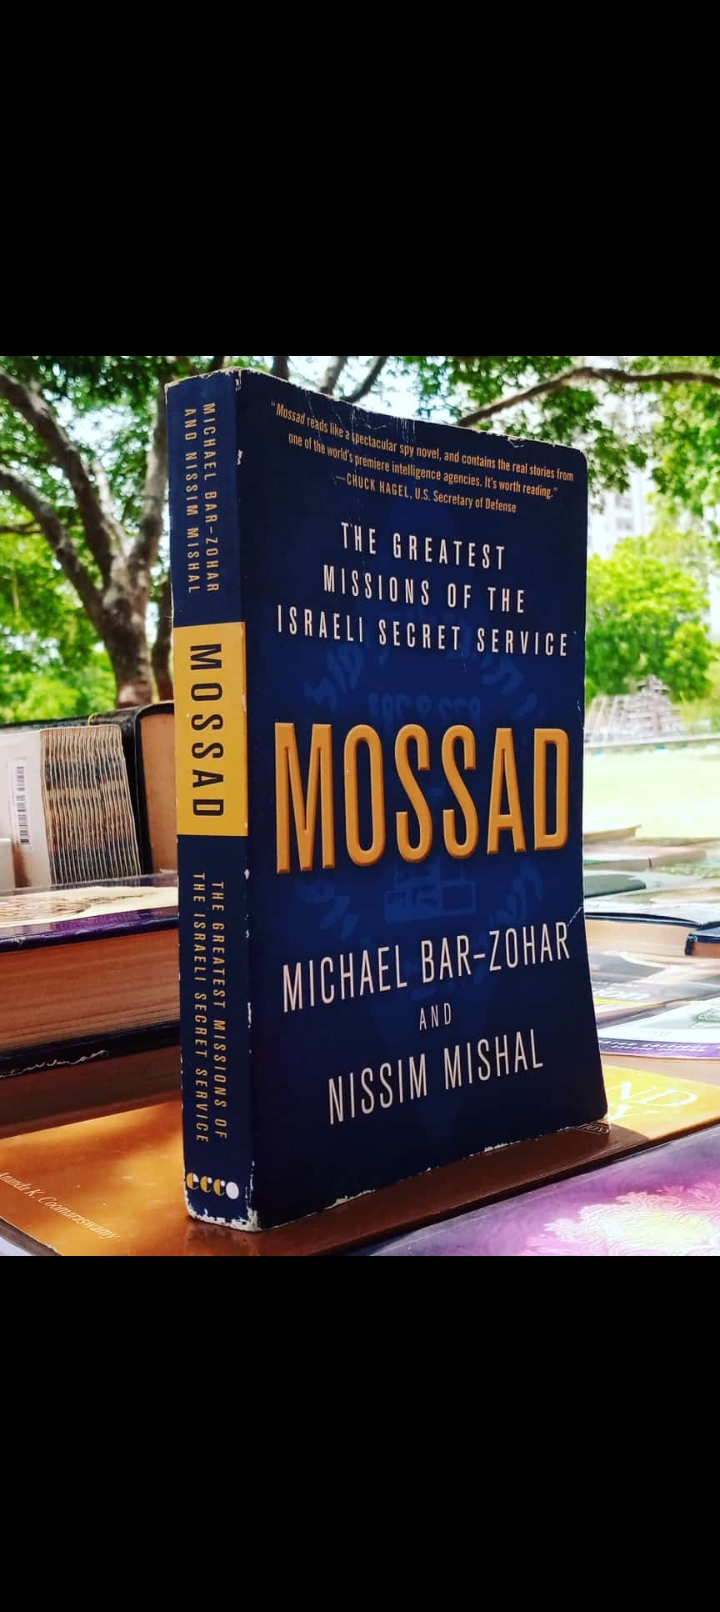 mossad the greatest missions of the israeli secret service by micheal bar zohar. original paperback